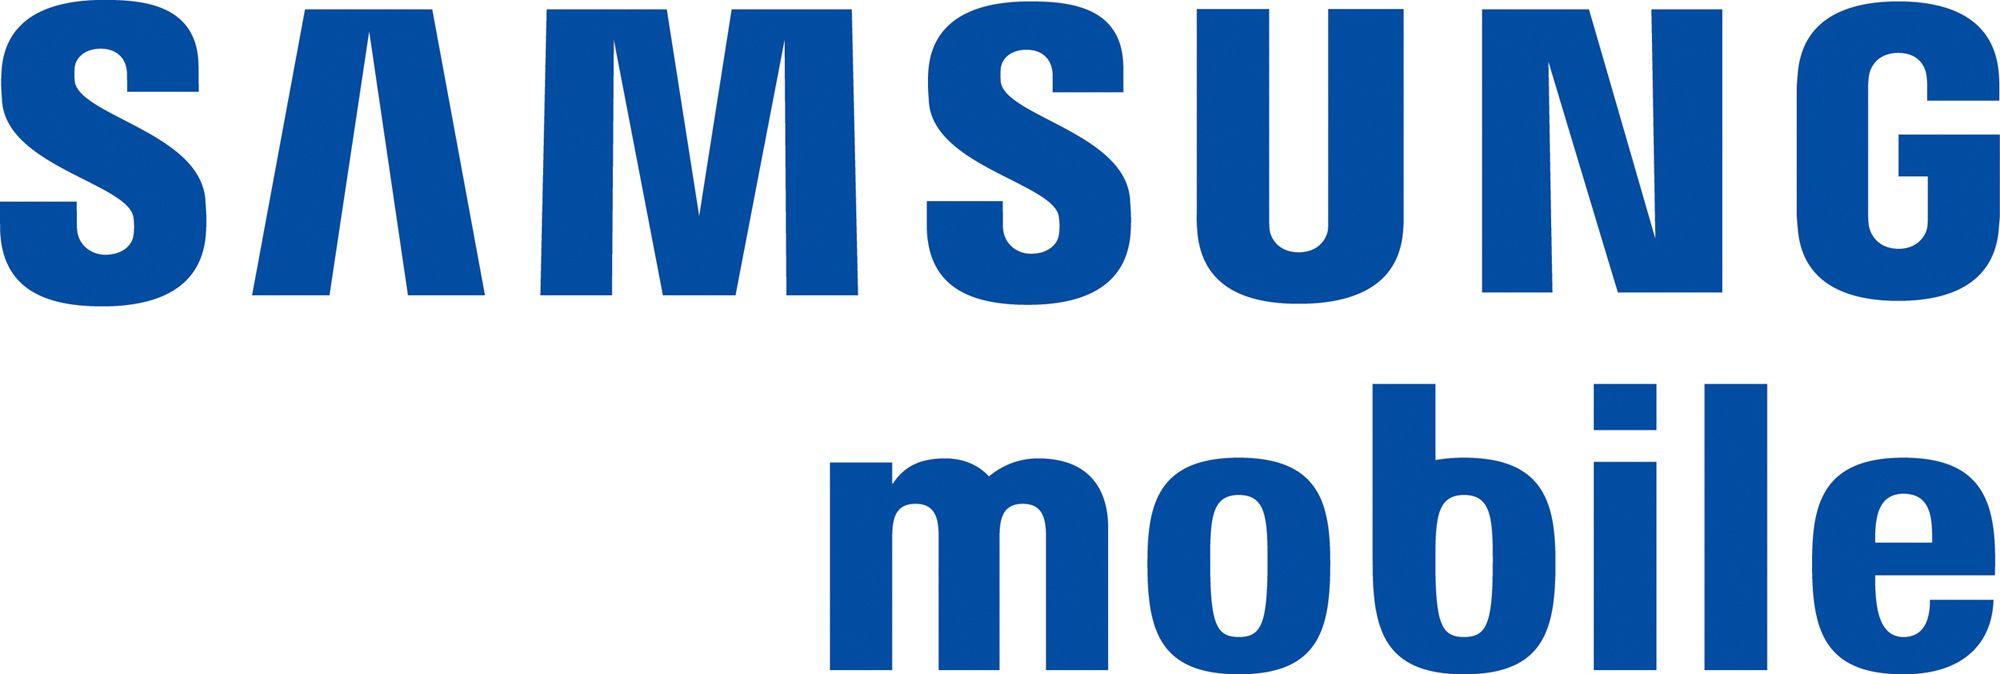 Samsung Phone Logo - Boost Mobile Pairs the Speed of 4G LTE and Shrinking Payments